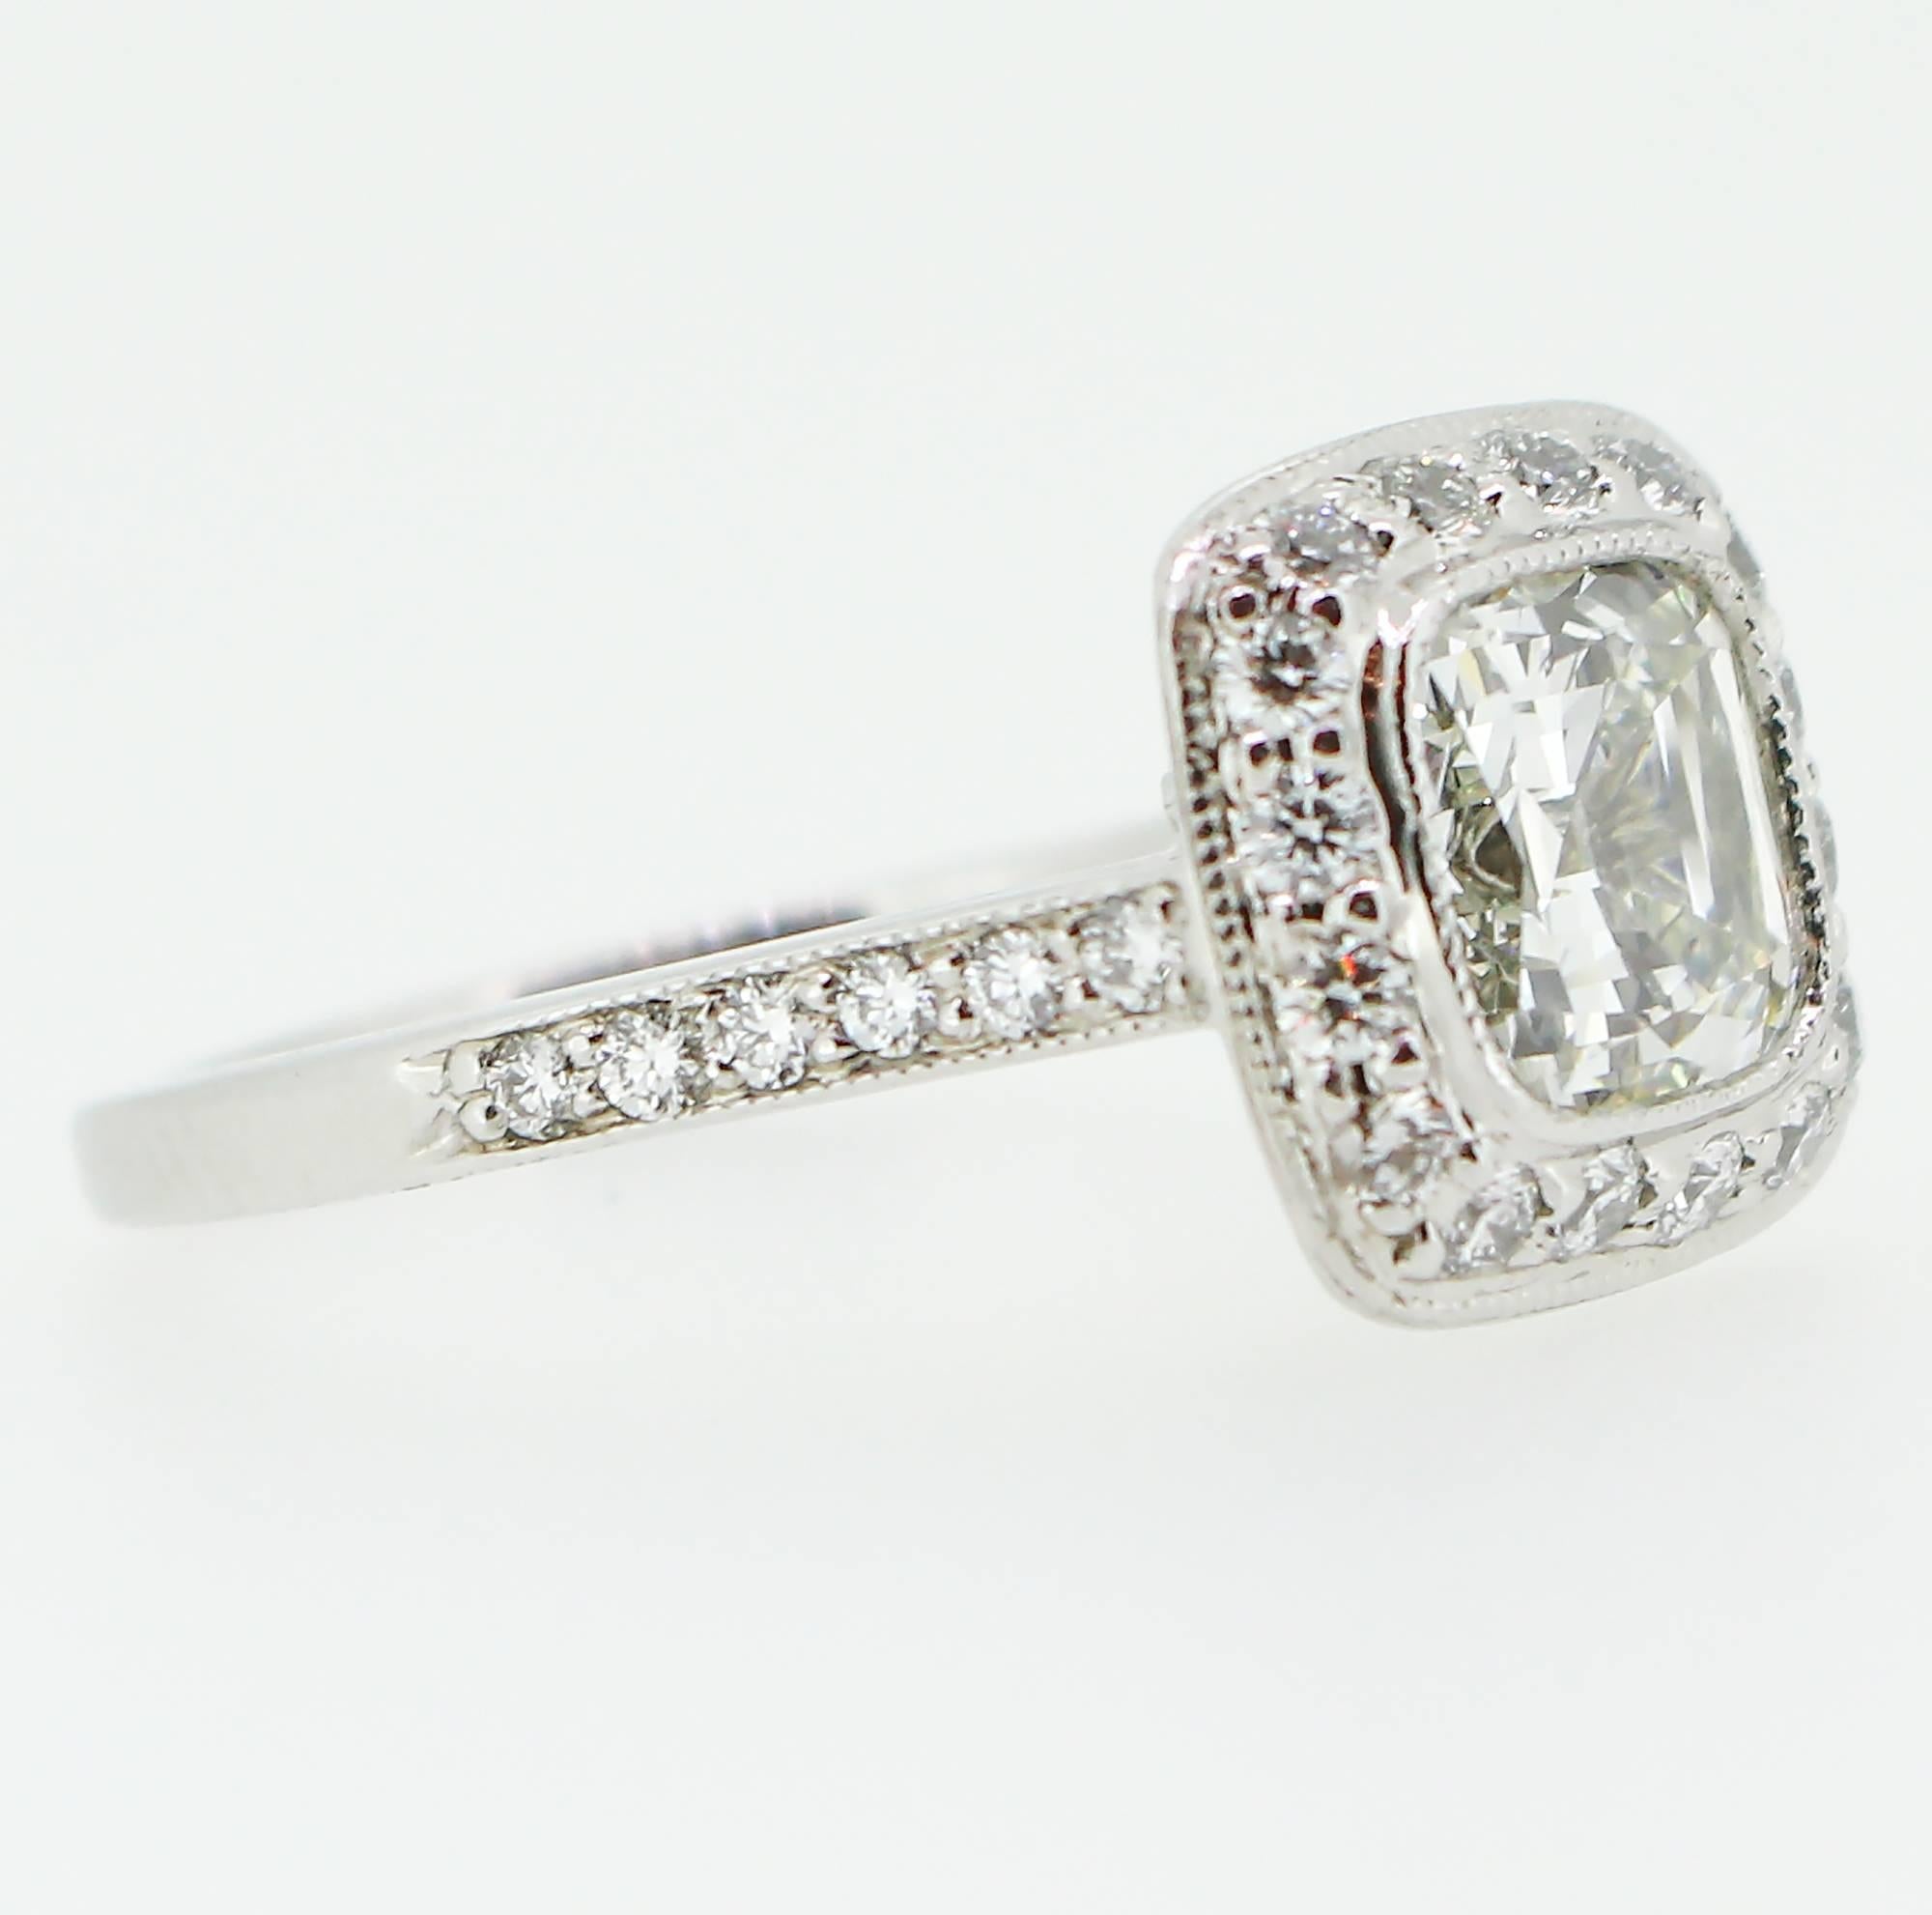 The center stone in this ring is a 1.62ct Legacy cushion cut diamond measuring 6.89 x 6.80 x 4.41mm and grading as an 